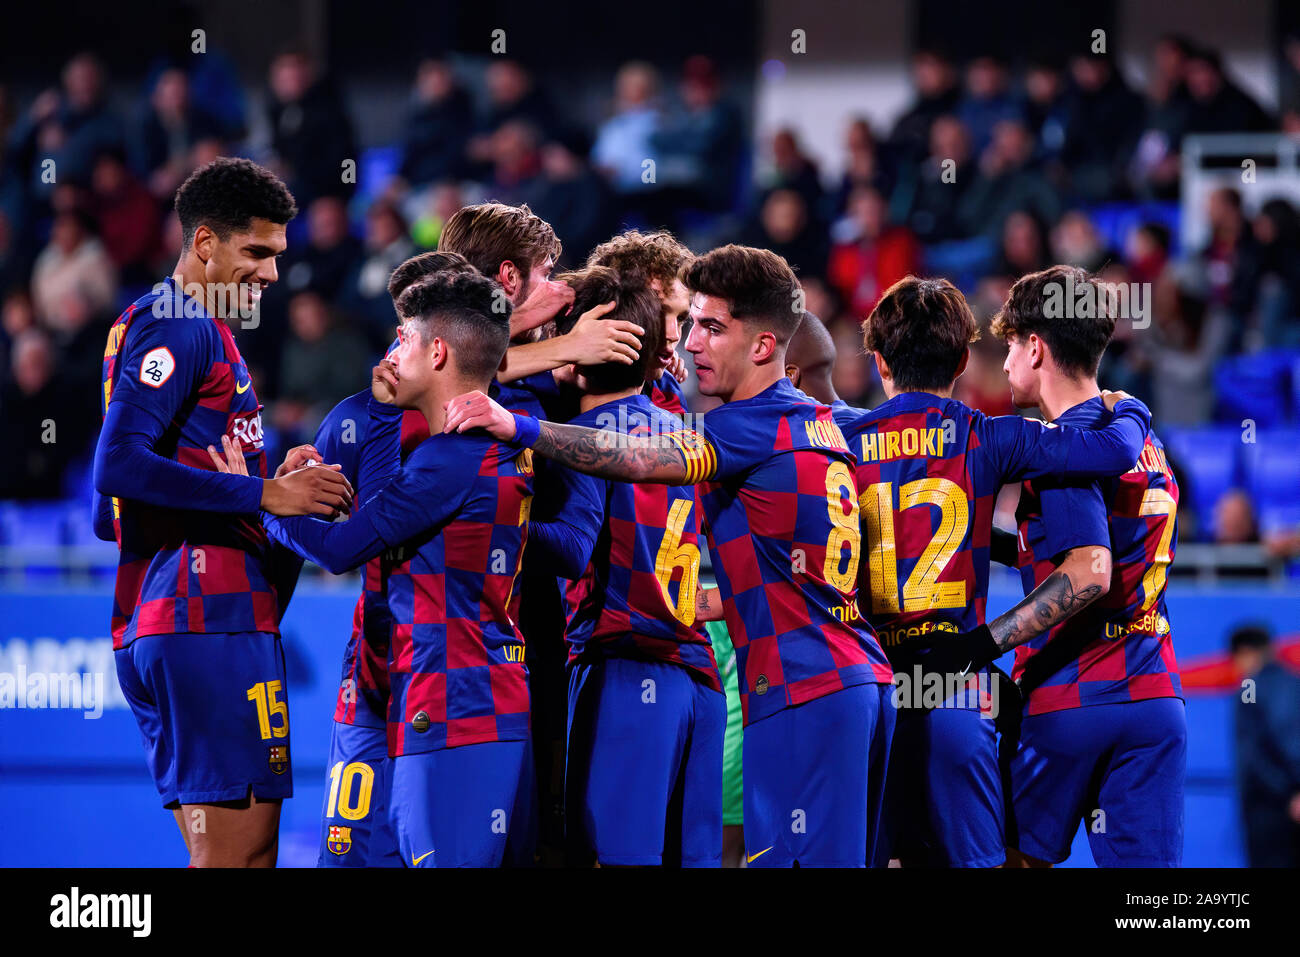 Barcelona Nov 17 Barcelona B Players Celebrate A Goal At The Second Division B Match Between Fc Barcelona B And Ue Cornella At The Johan Cruyff Sta Stock Photo Alamy